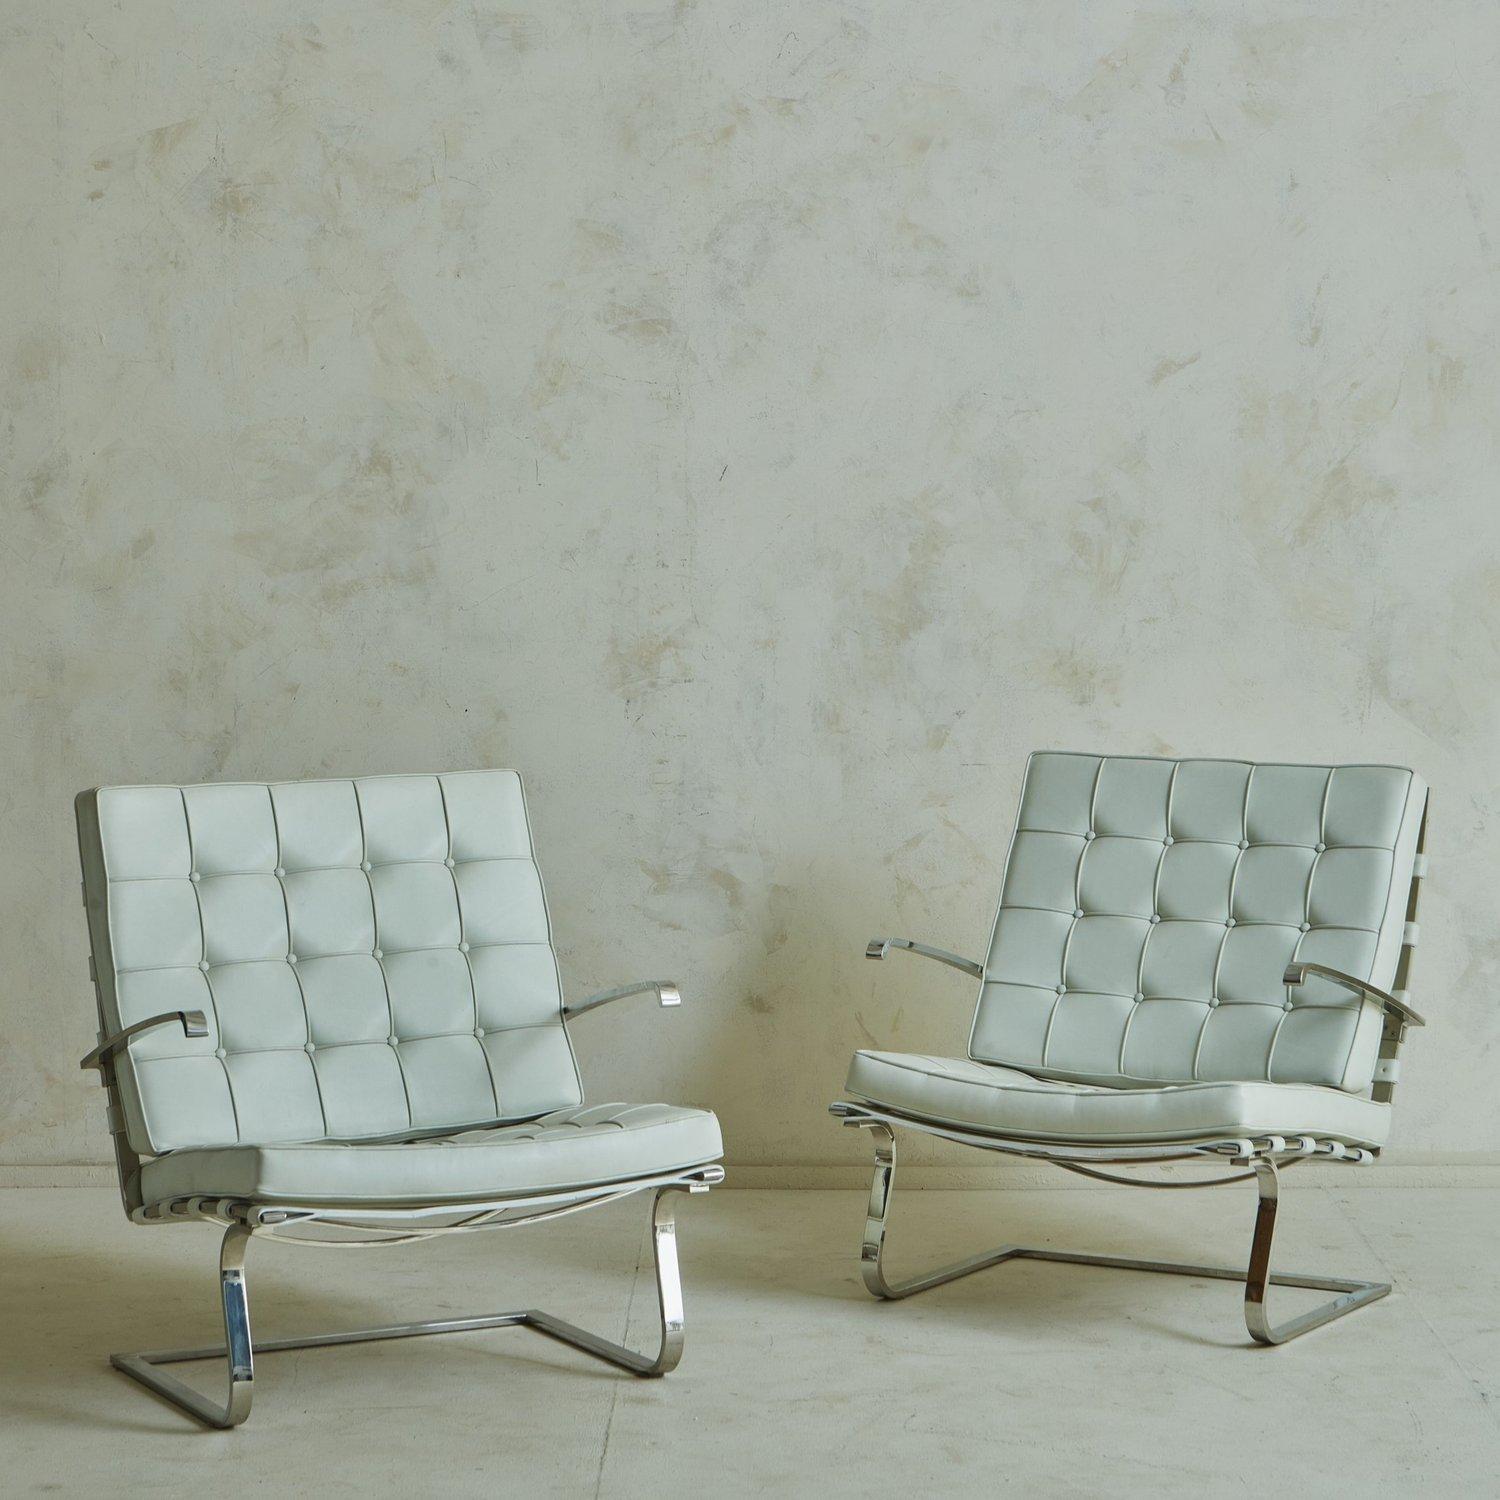 A pair of Tugendhat chairs in white leather designed by architect Mies Van Der Rohe in 1929 for one of his most distinguished projects: the Tugendhat Villa in Brno, Czech Republic. The design was originally manufactured in Germany by Berliner